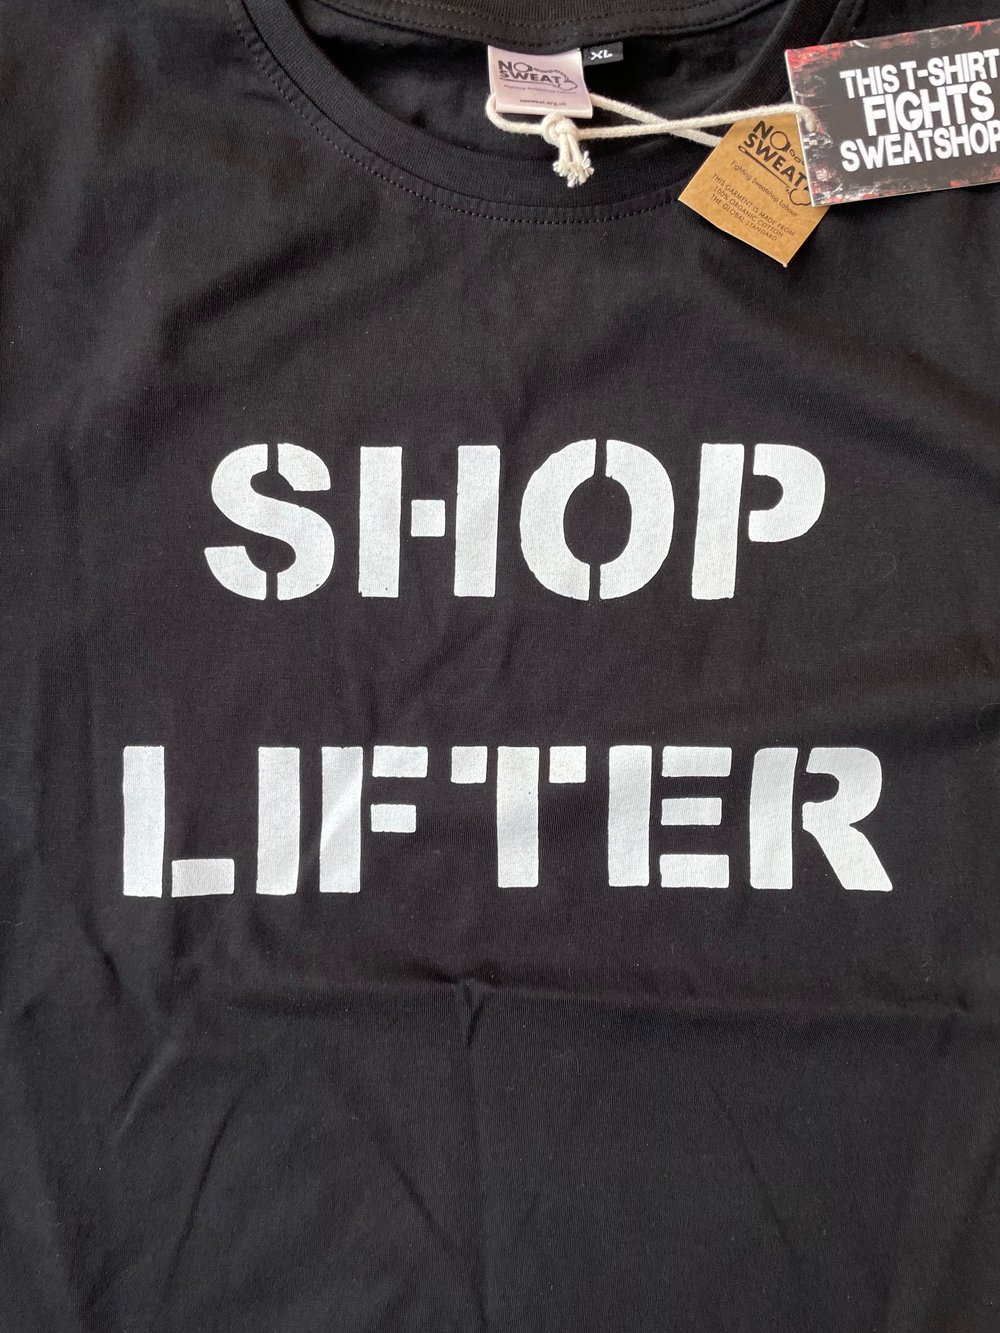 Image of SHOP LIFTER T-SHIRT (enter your choice of free print in notes at checkout screenprints not included)